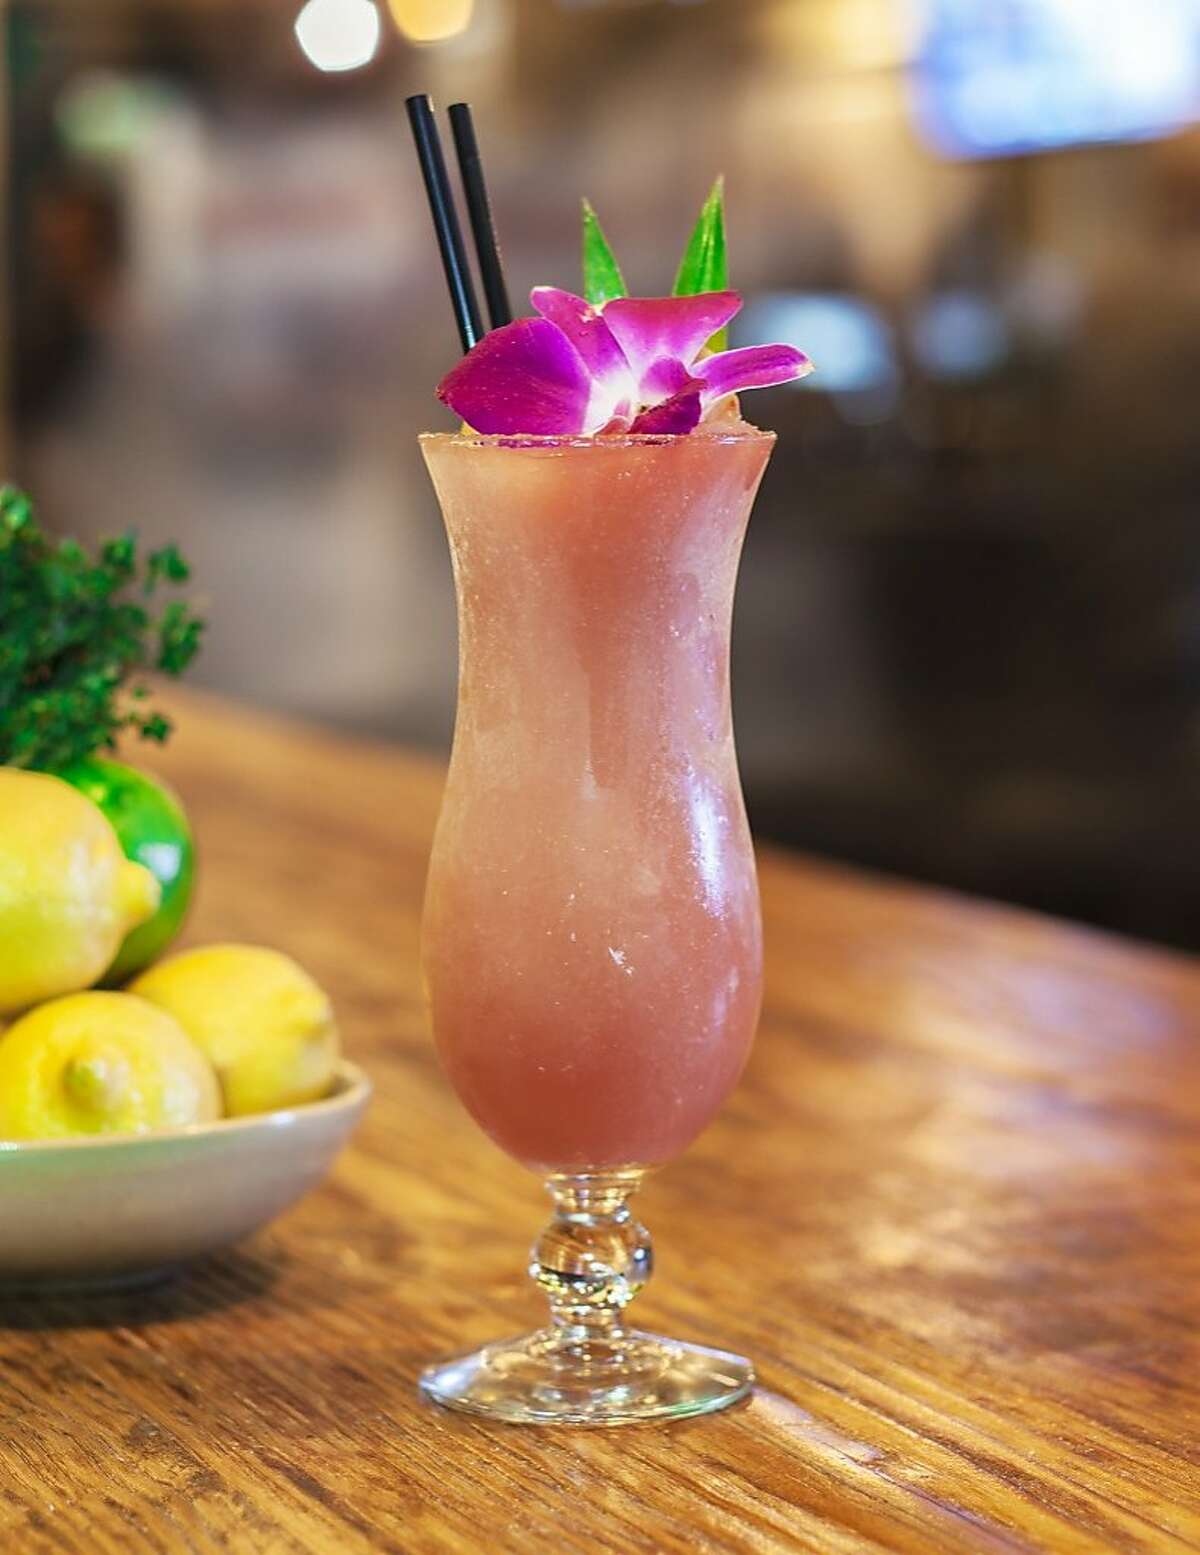 Palm House Fros� Cocktail (ros�, thyme, strawberry pur�e, lemon juice and rum; $9.75).